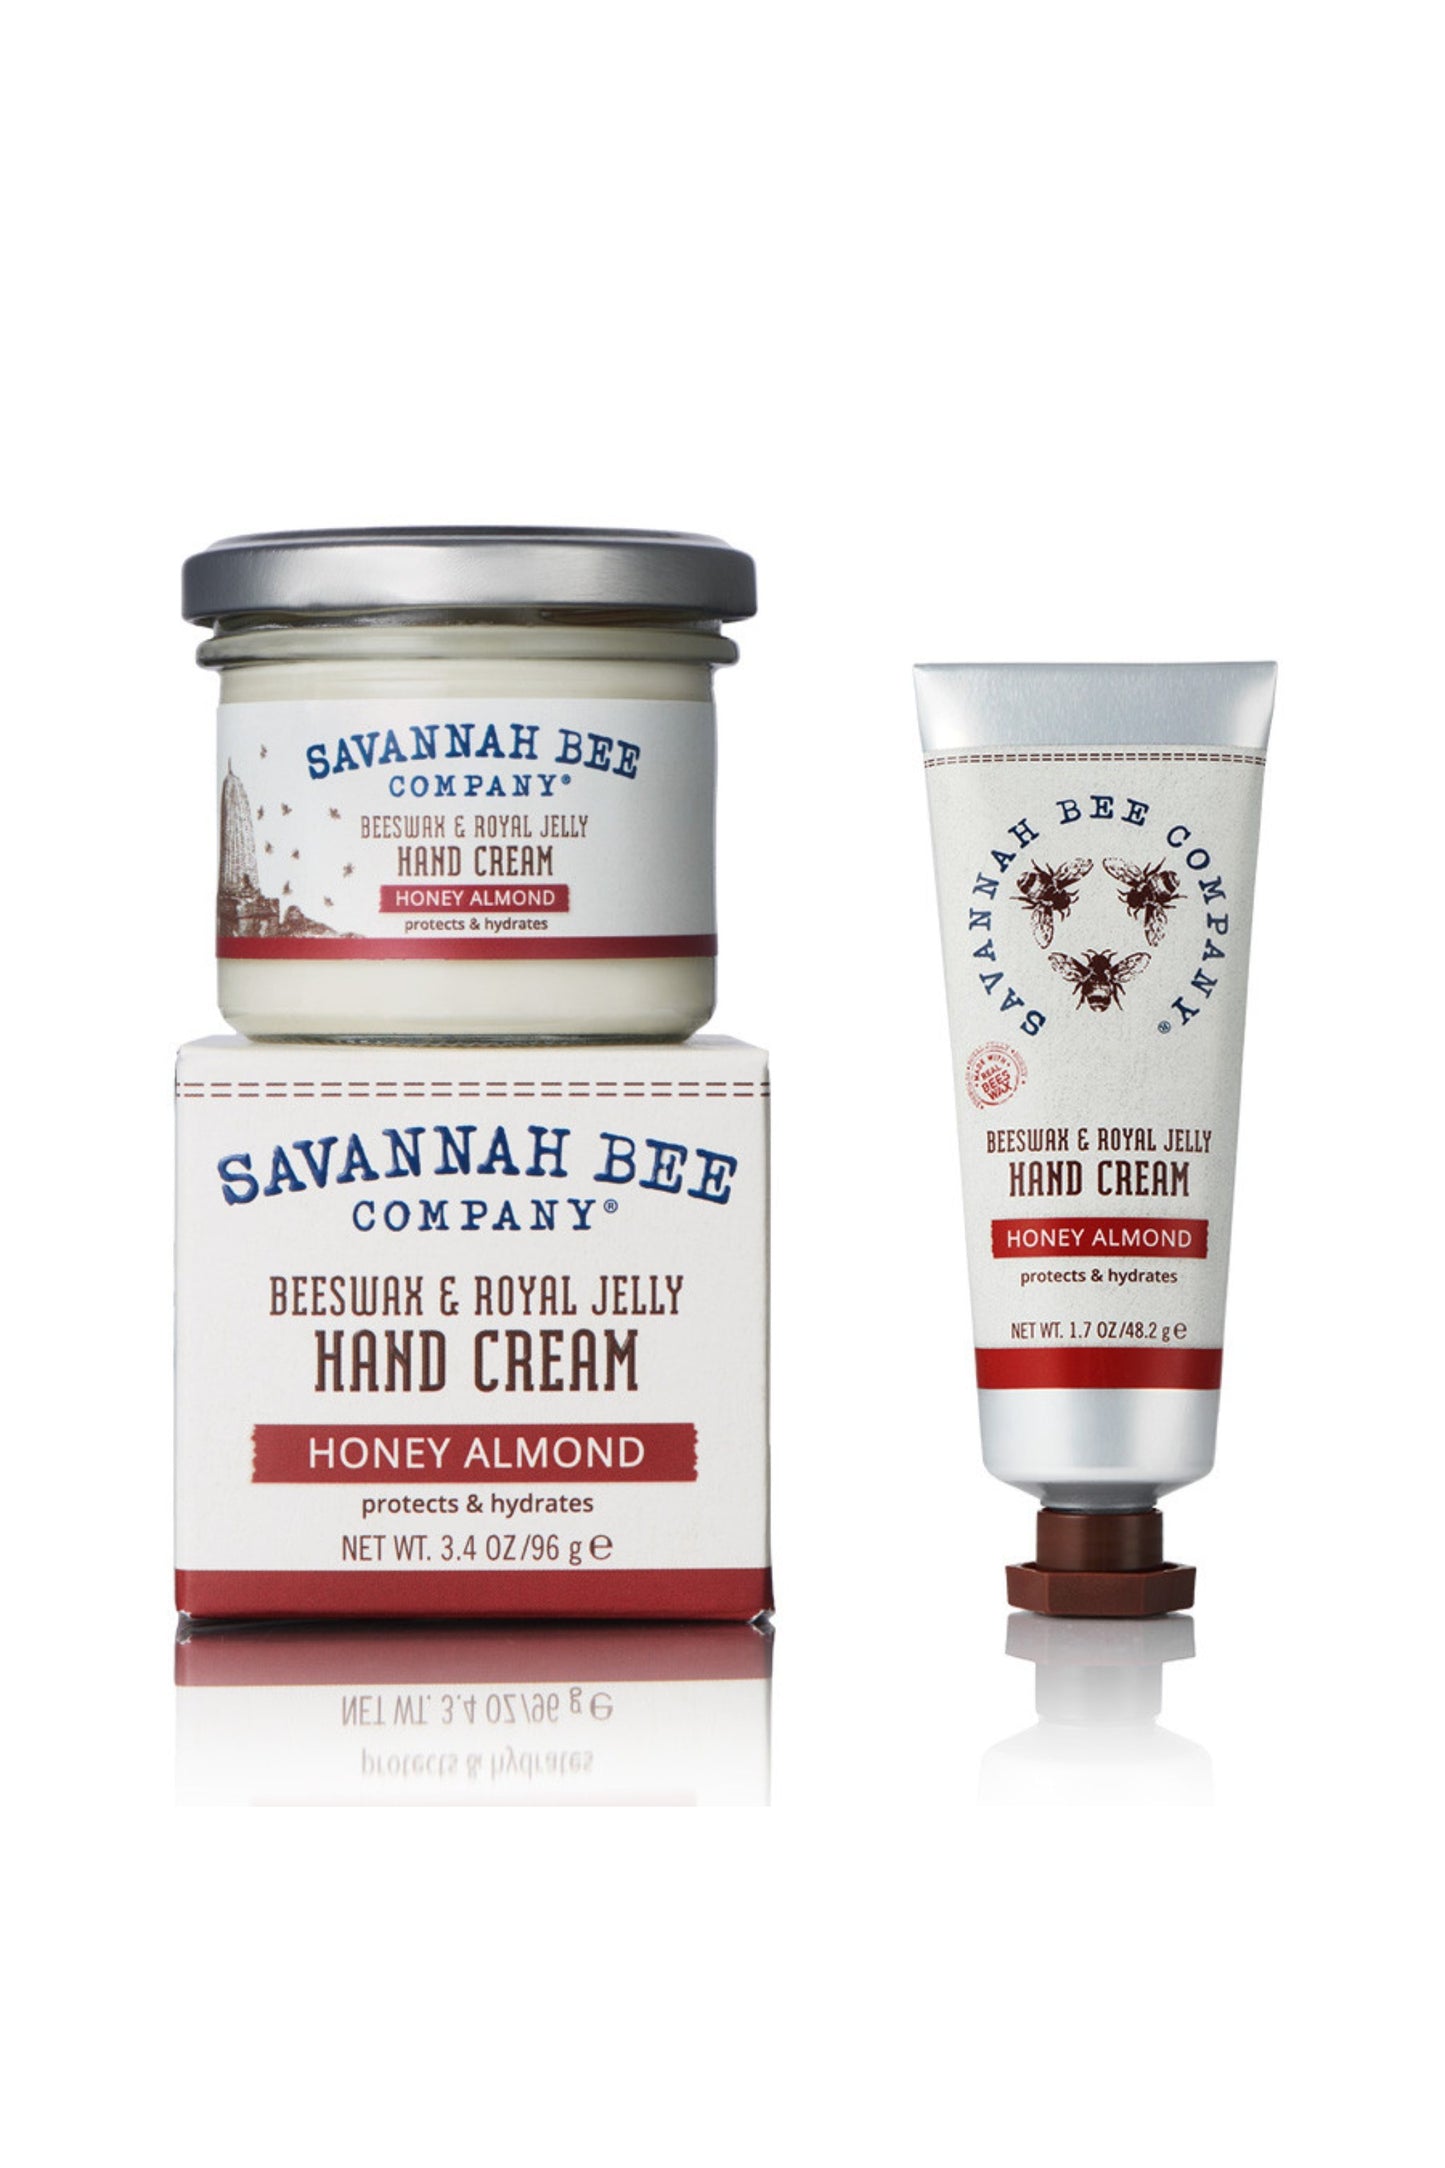 Honey Almond Beeswax & Royal Jelly Hand cream in a Jar or Tube